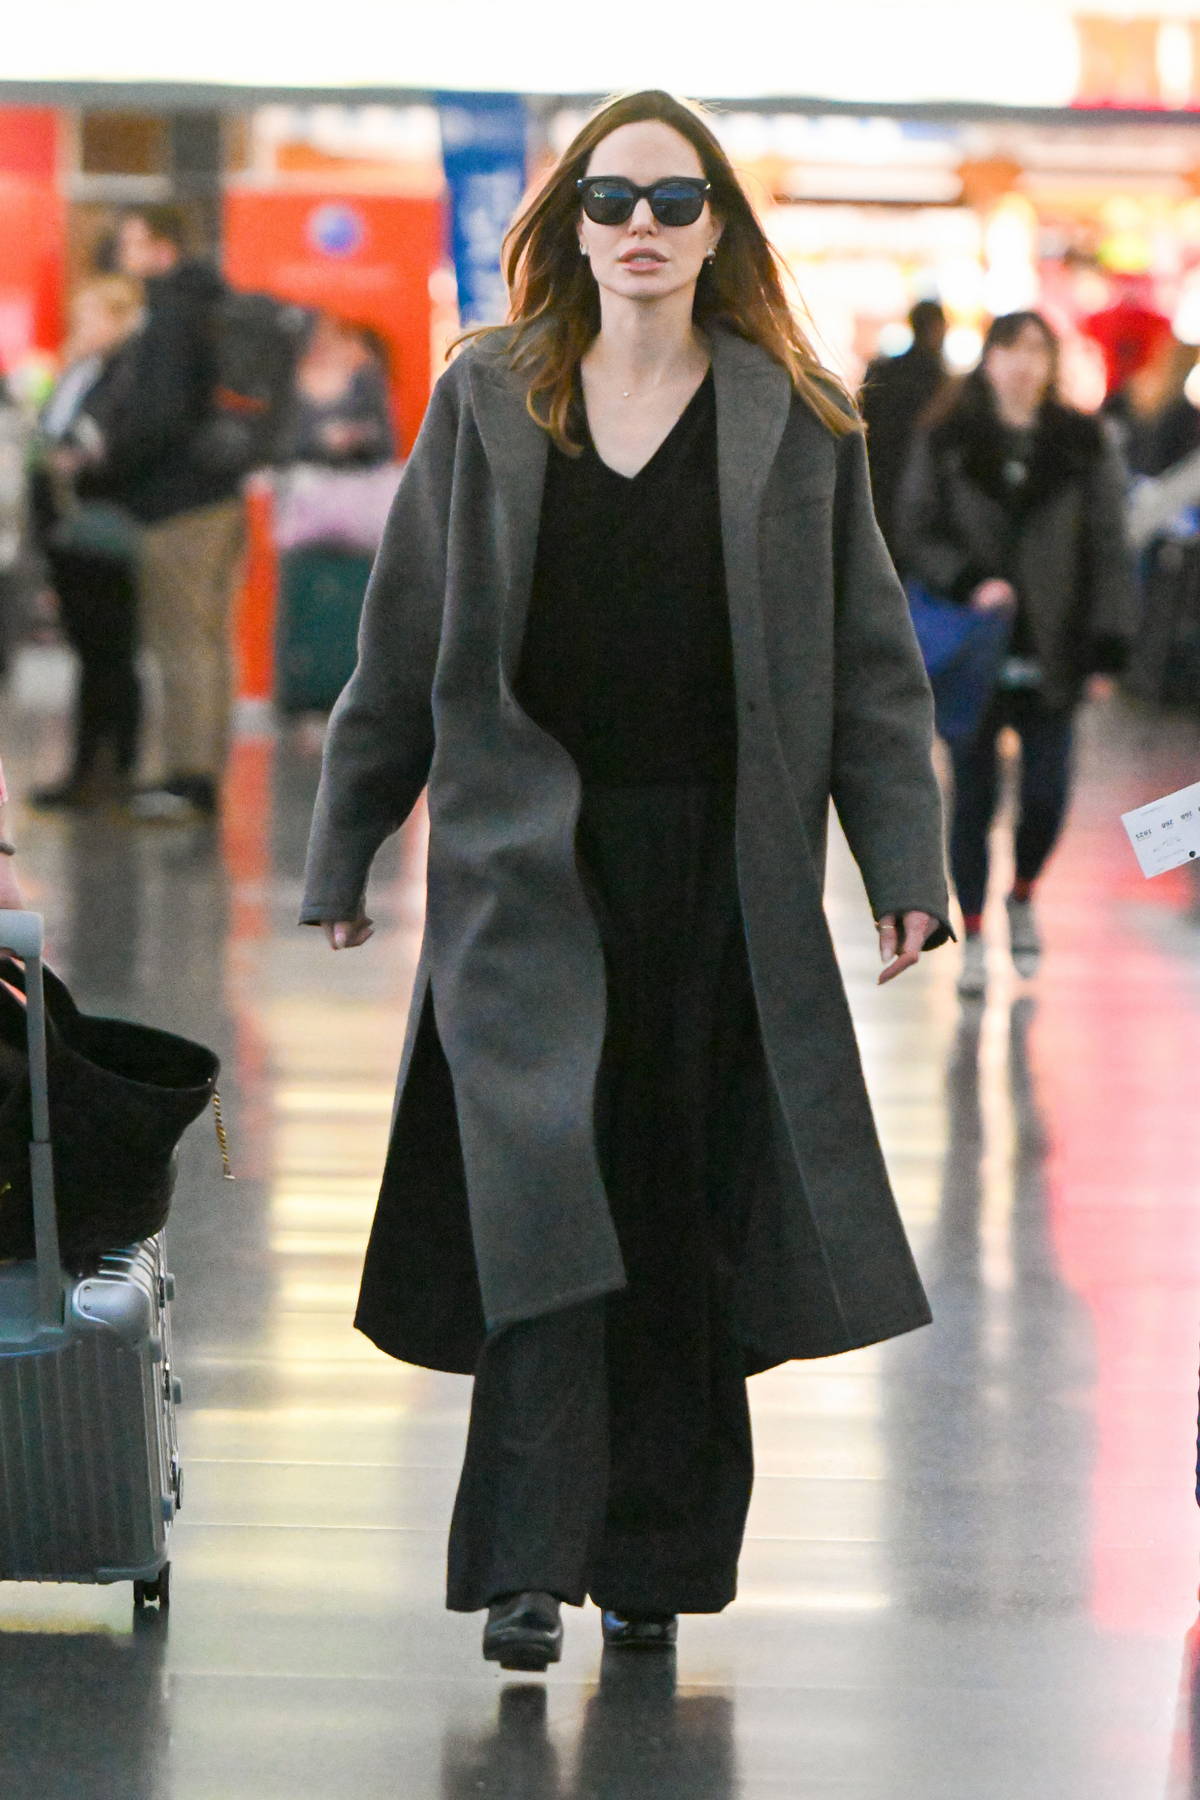 Angelina Jolie is classy as ever as she arrives at JFK Airport in New York City